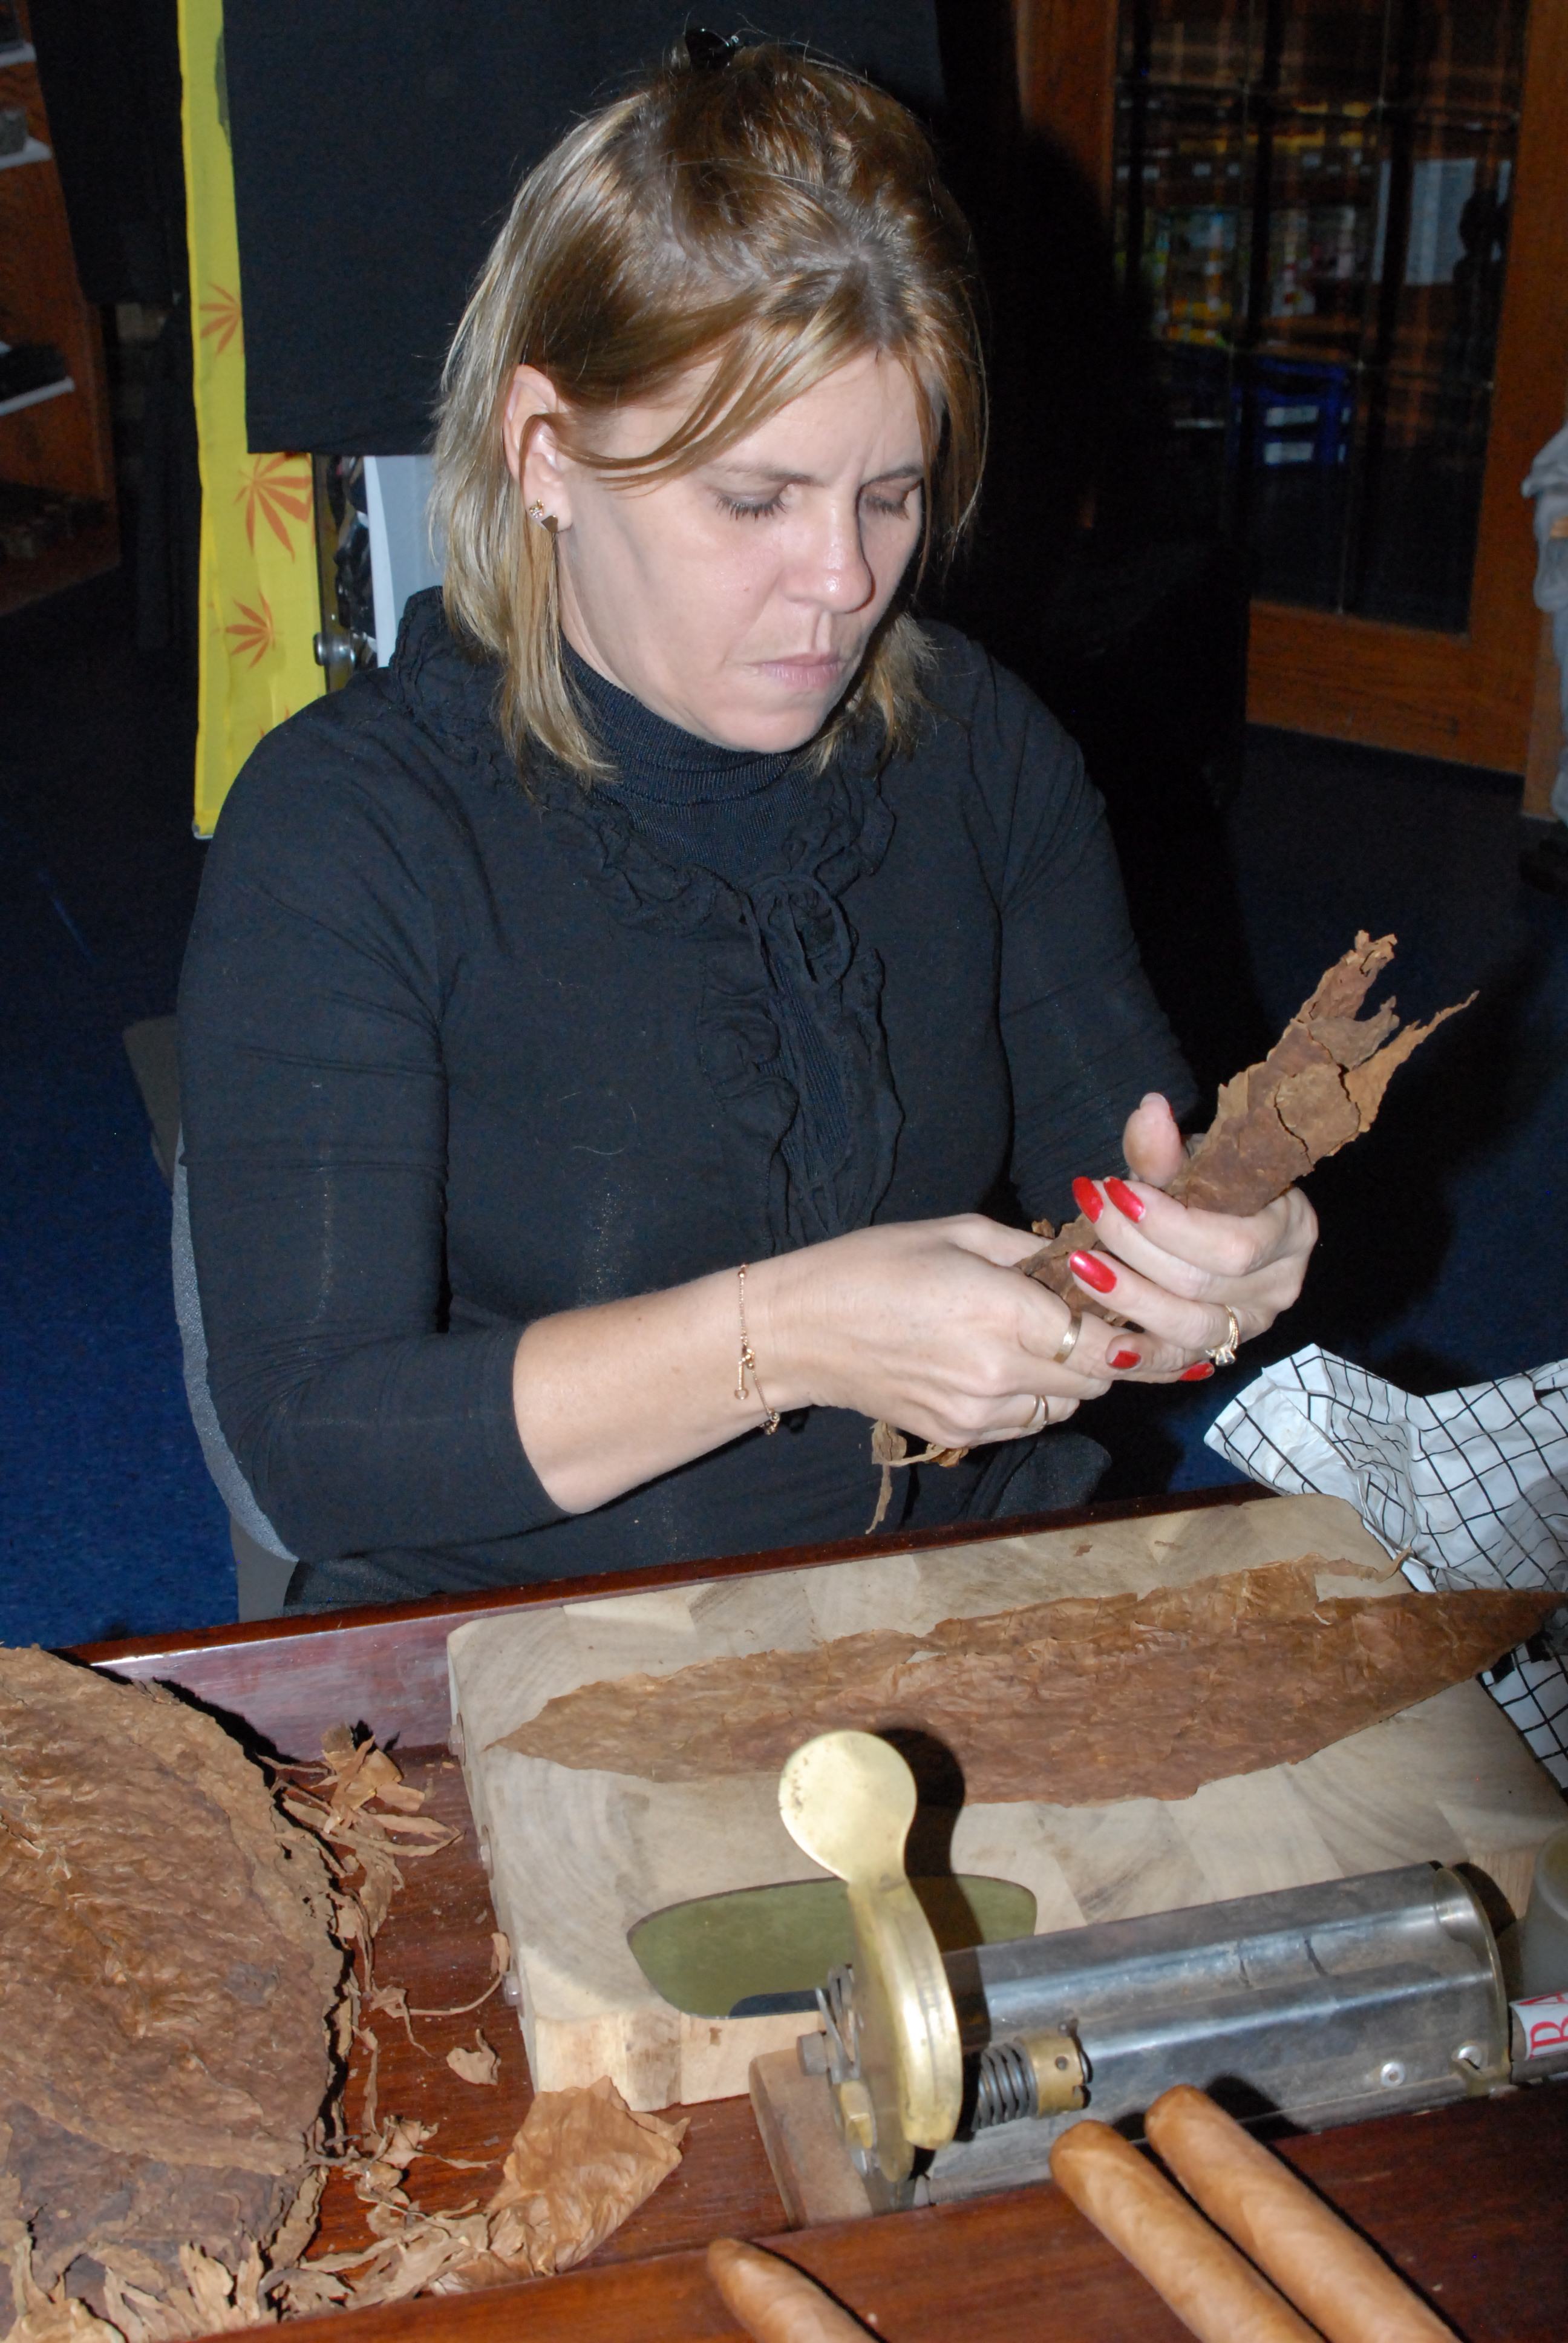 FINE ART- Miltania Perez demonstrated how to roll a Cuban cigar at Gord’s Smoke Shop in Red Deer recently.